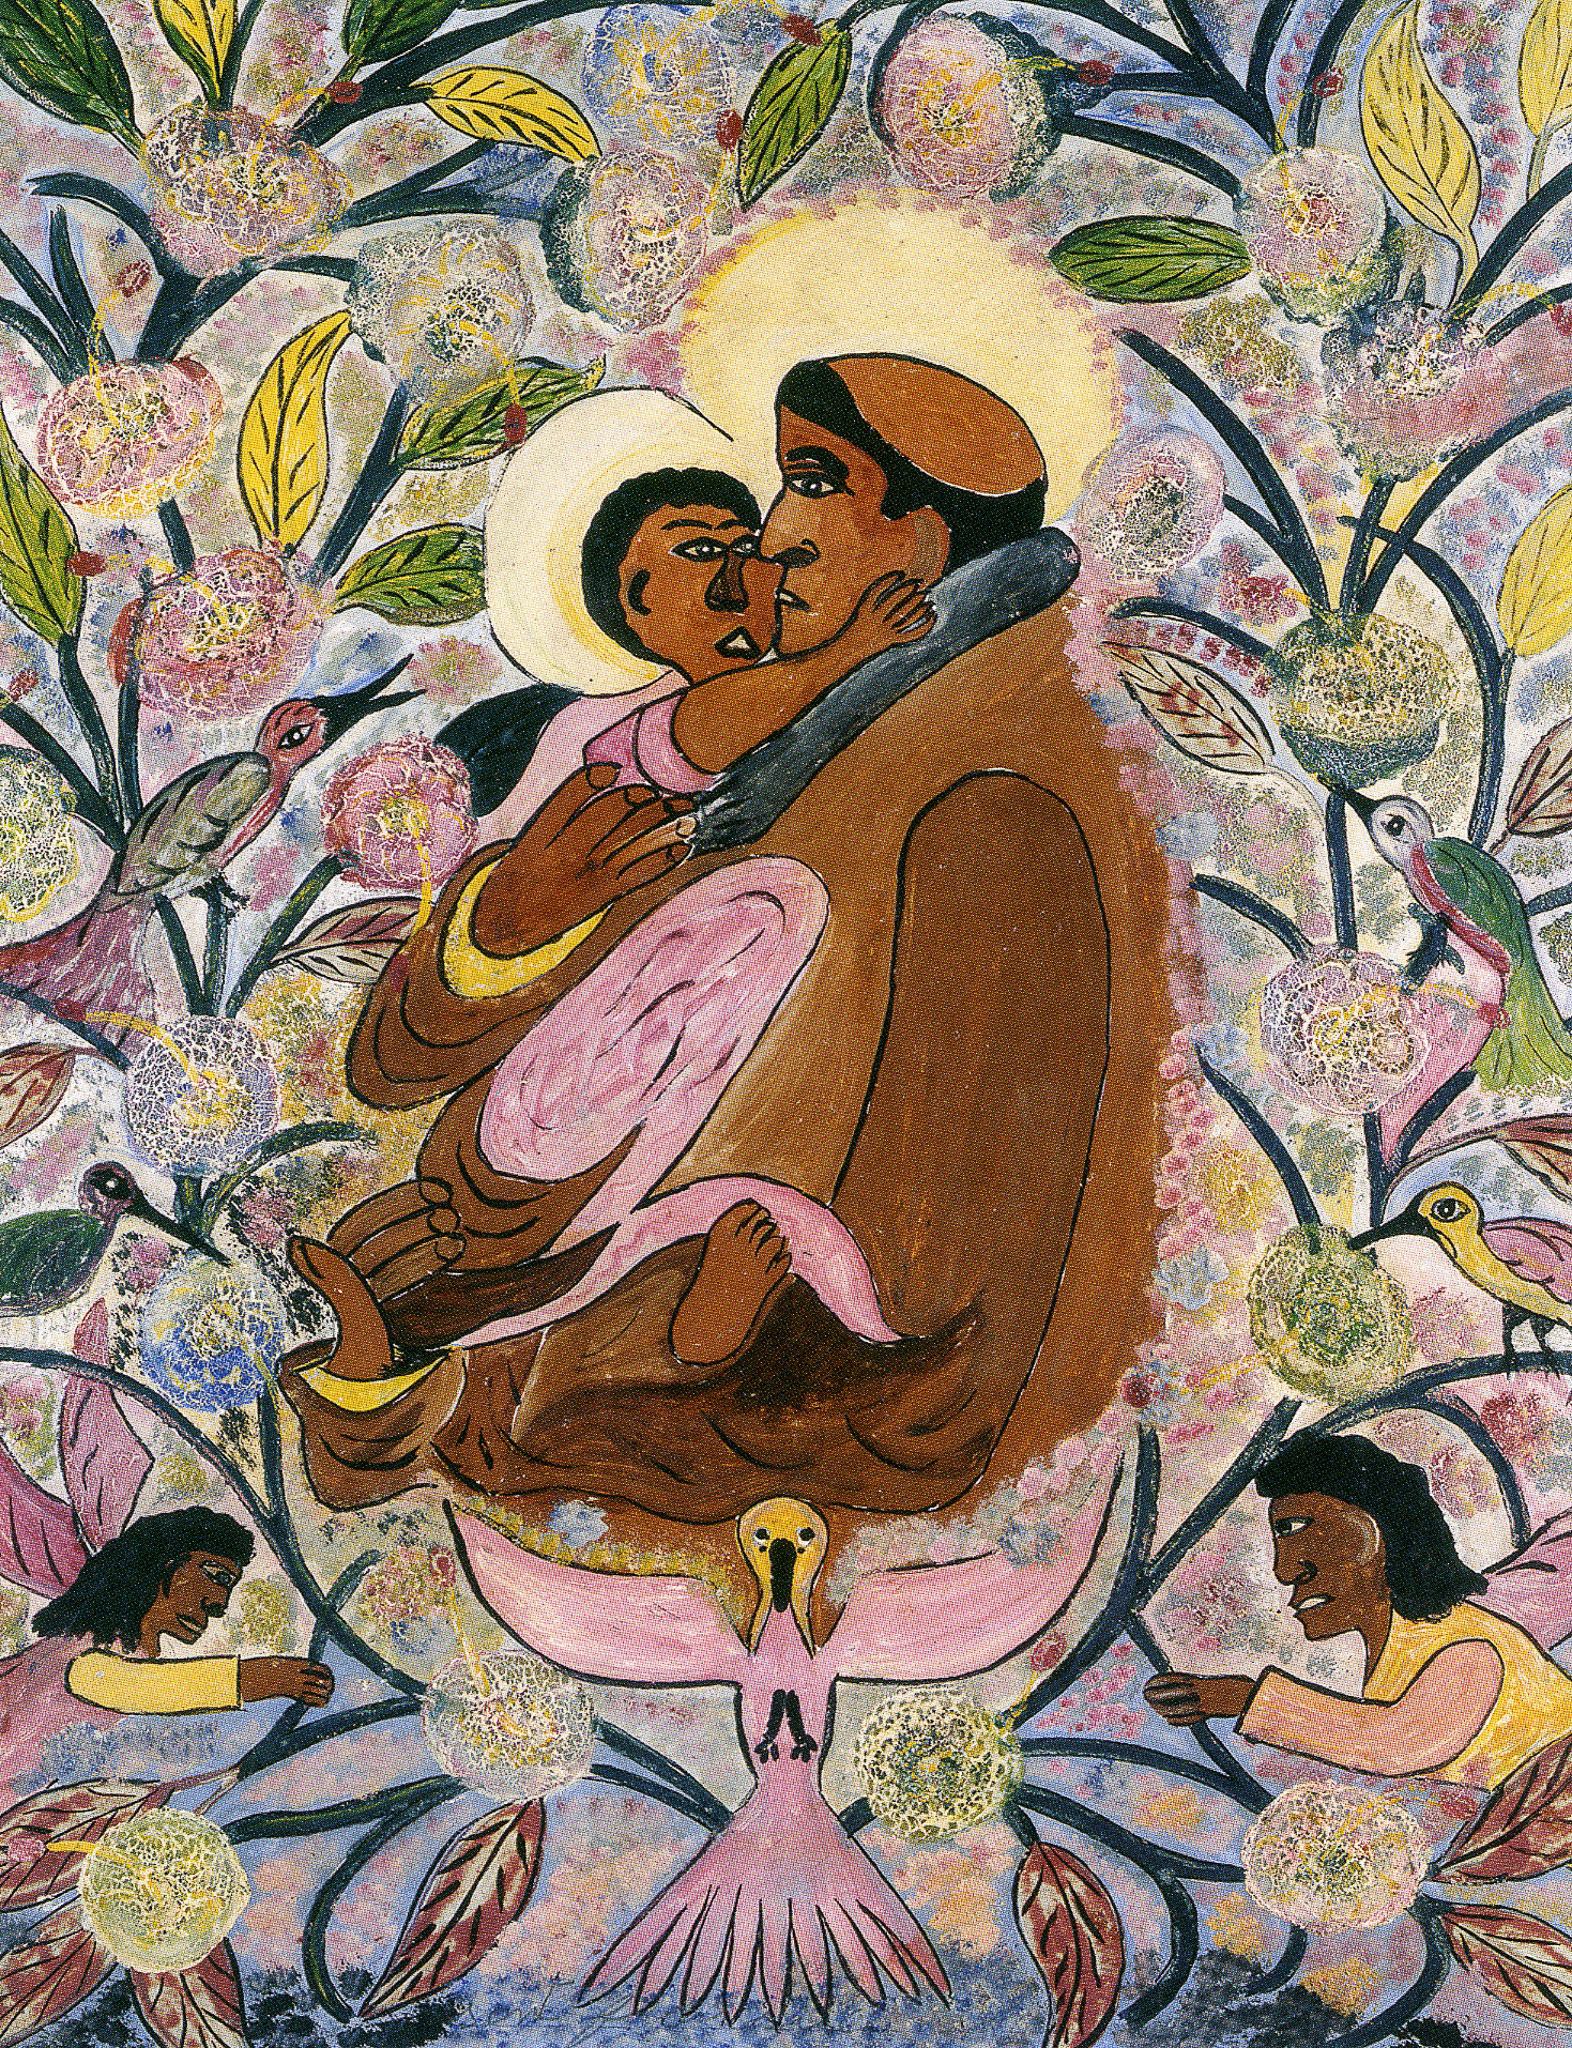 Saint Francis and the Infant Jesus, 1946-48